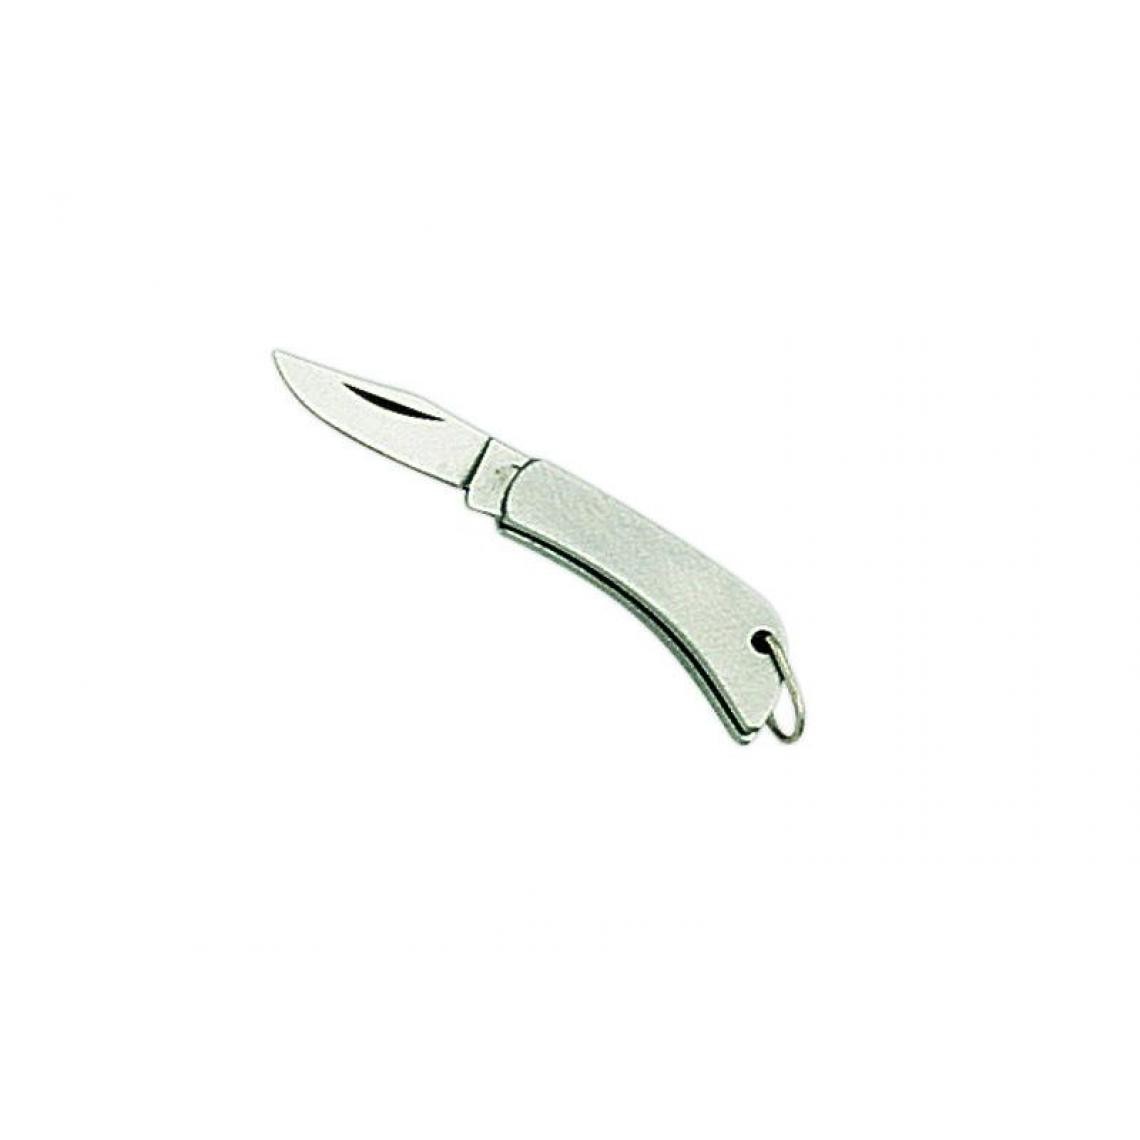 Maserin - MASERIN - 6702 - CANIF BIJOU MASERIN 22MM TOUT INOX - Outils de coupe